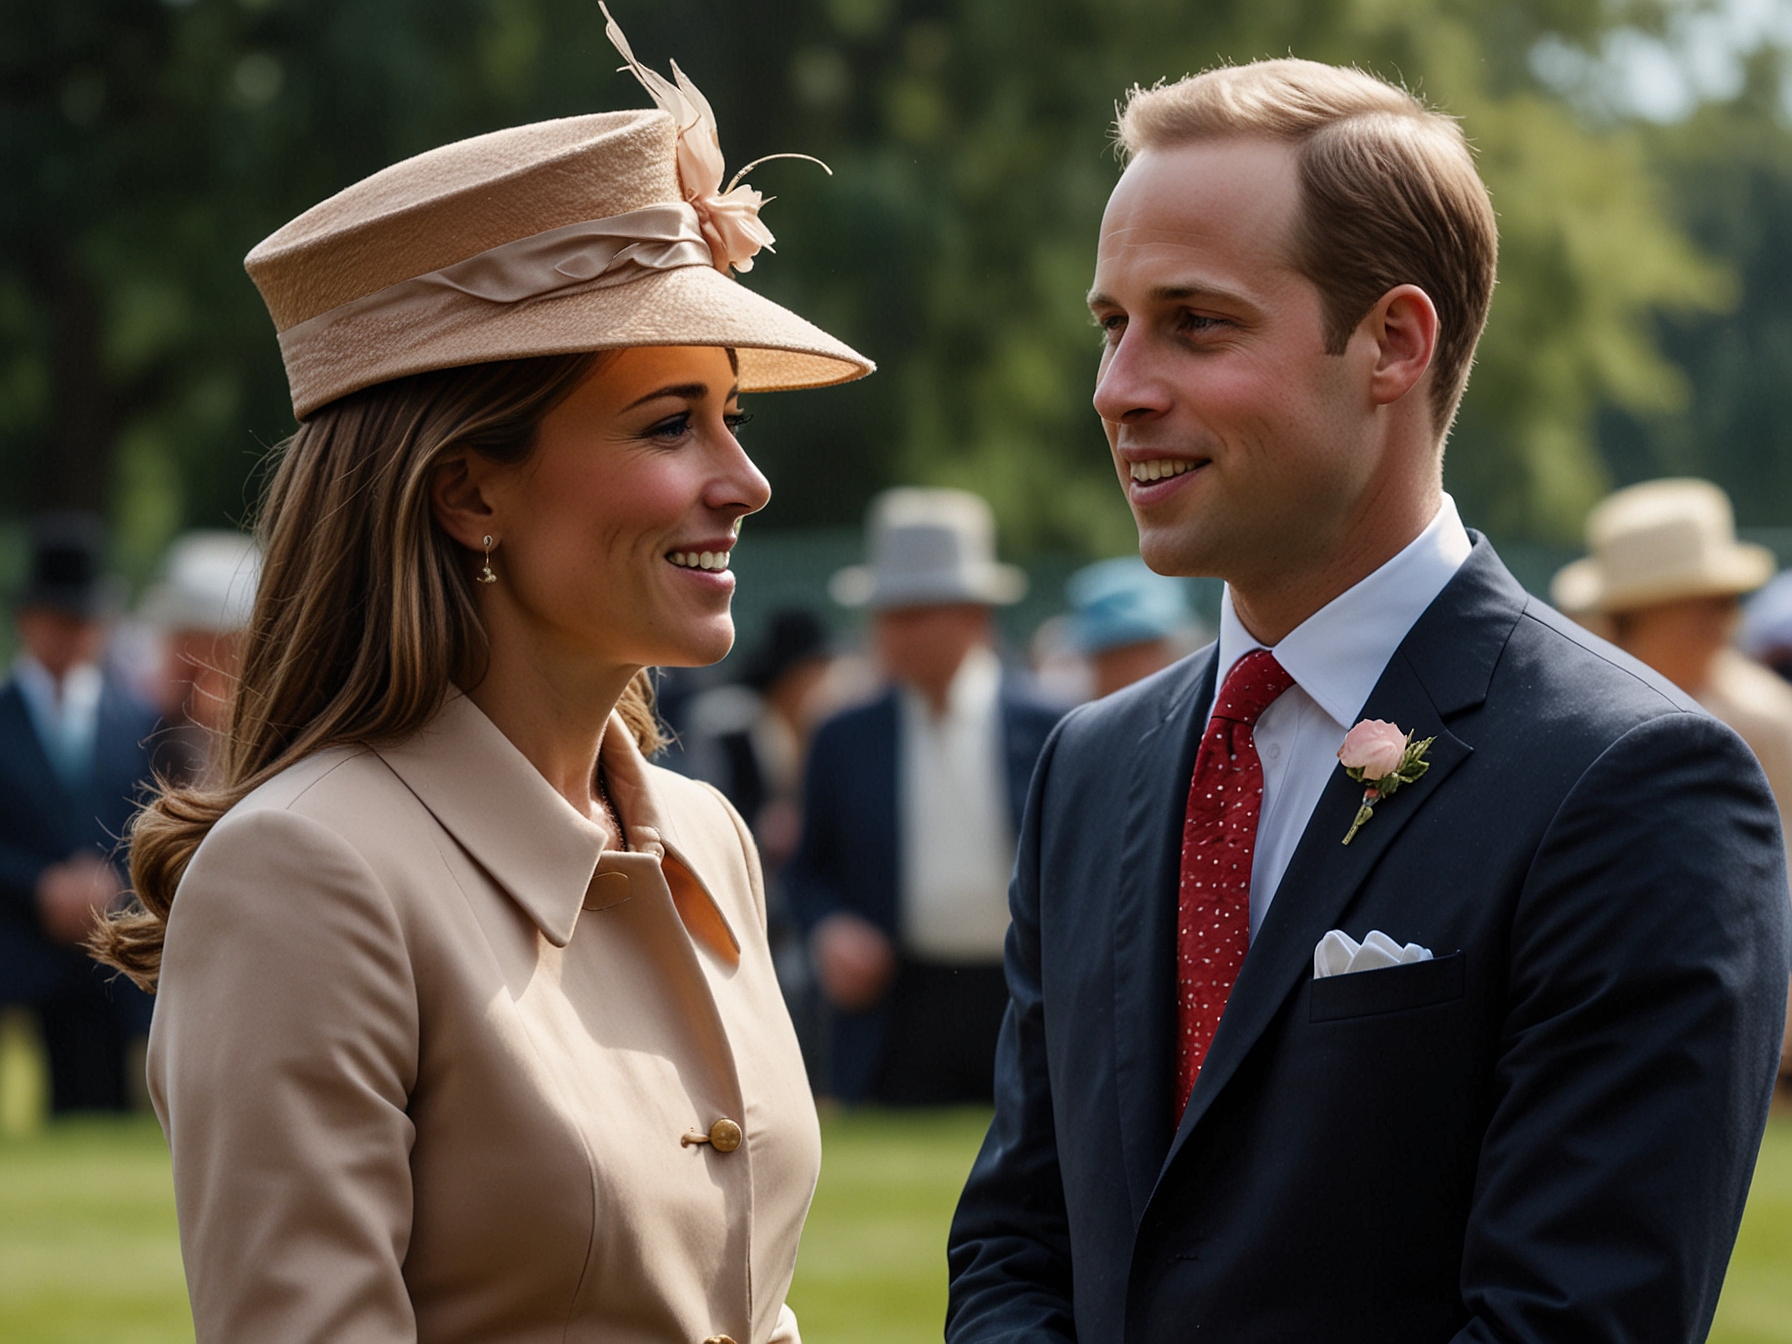 Prince William warmly engages in a heartfelt conversation with Carole Middleton at Royal Ascot, reflecting the deep familial bond and unity between the Royal and Middleton families.